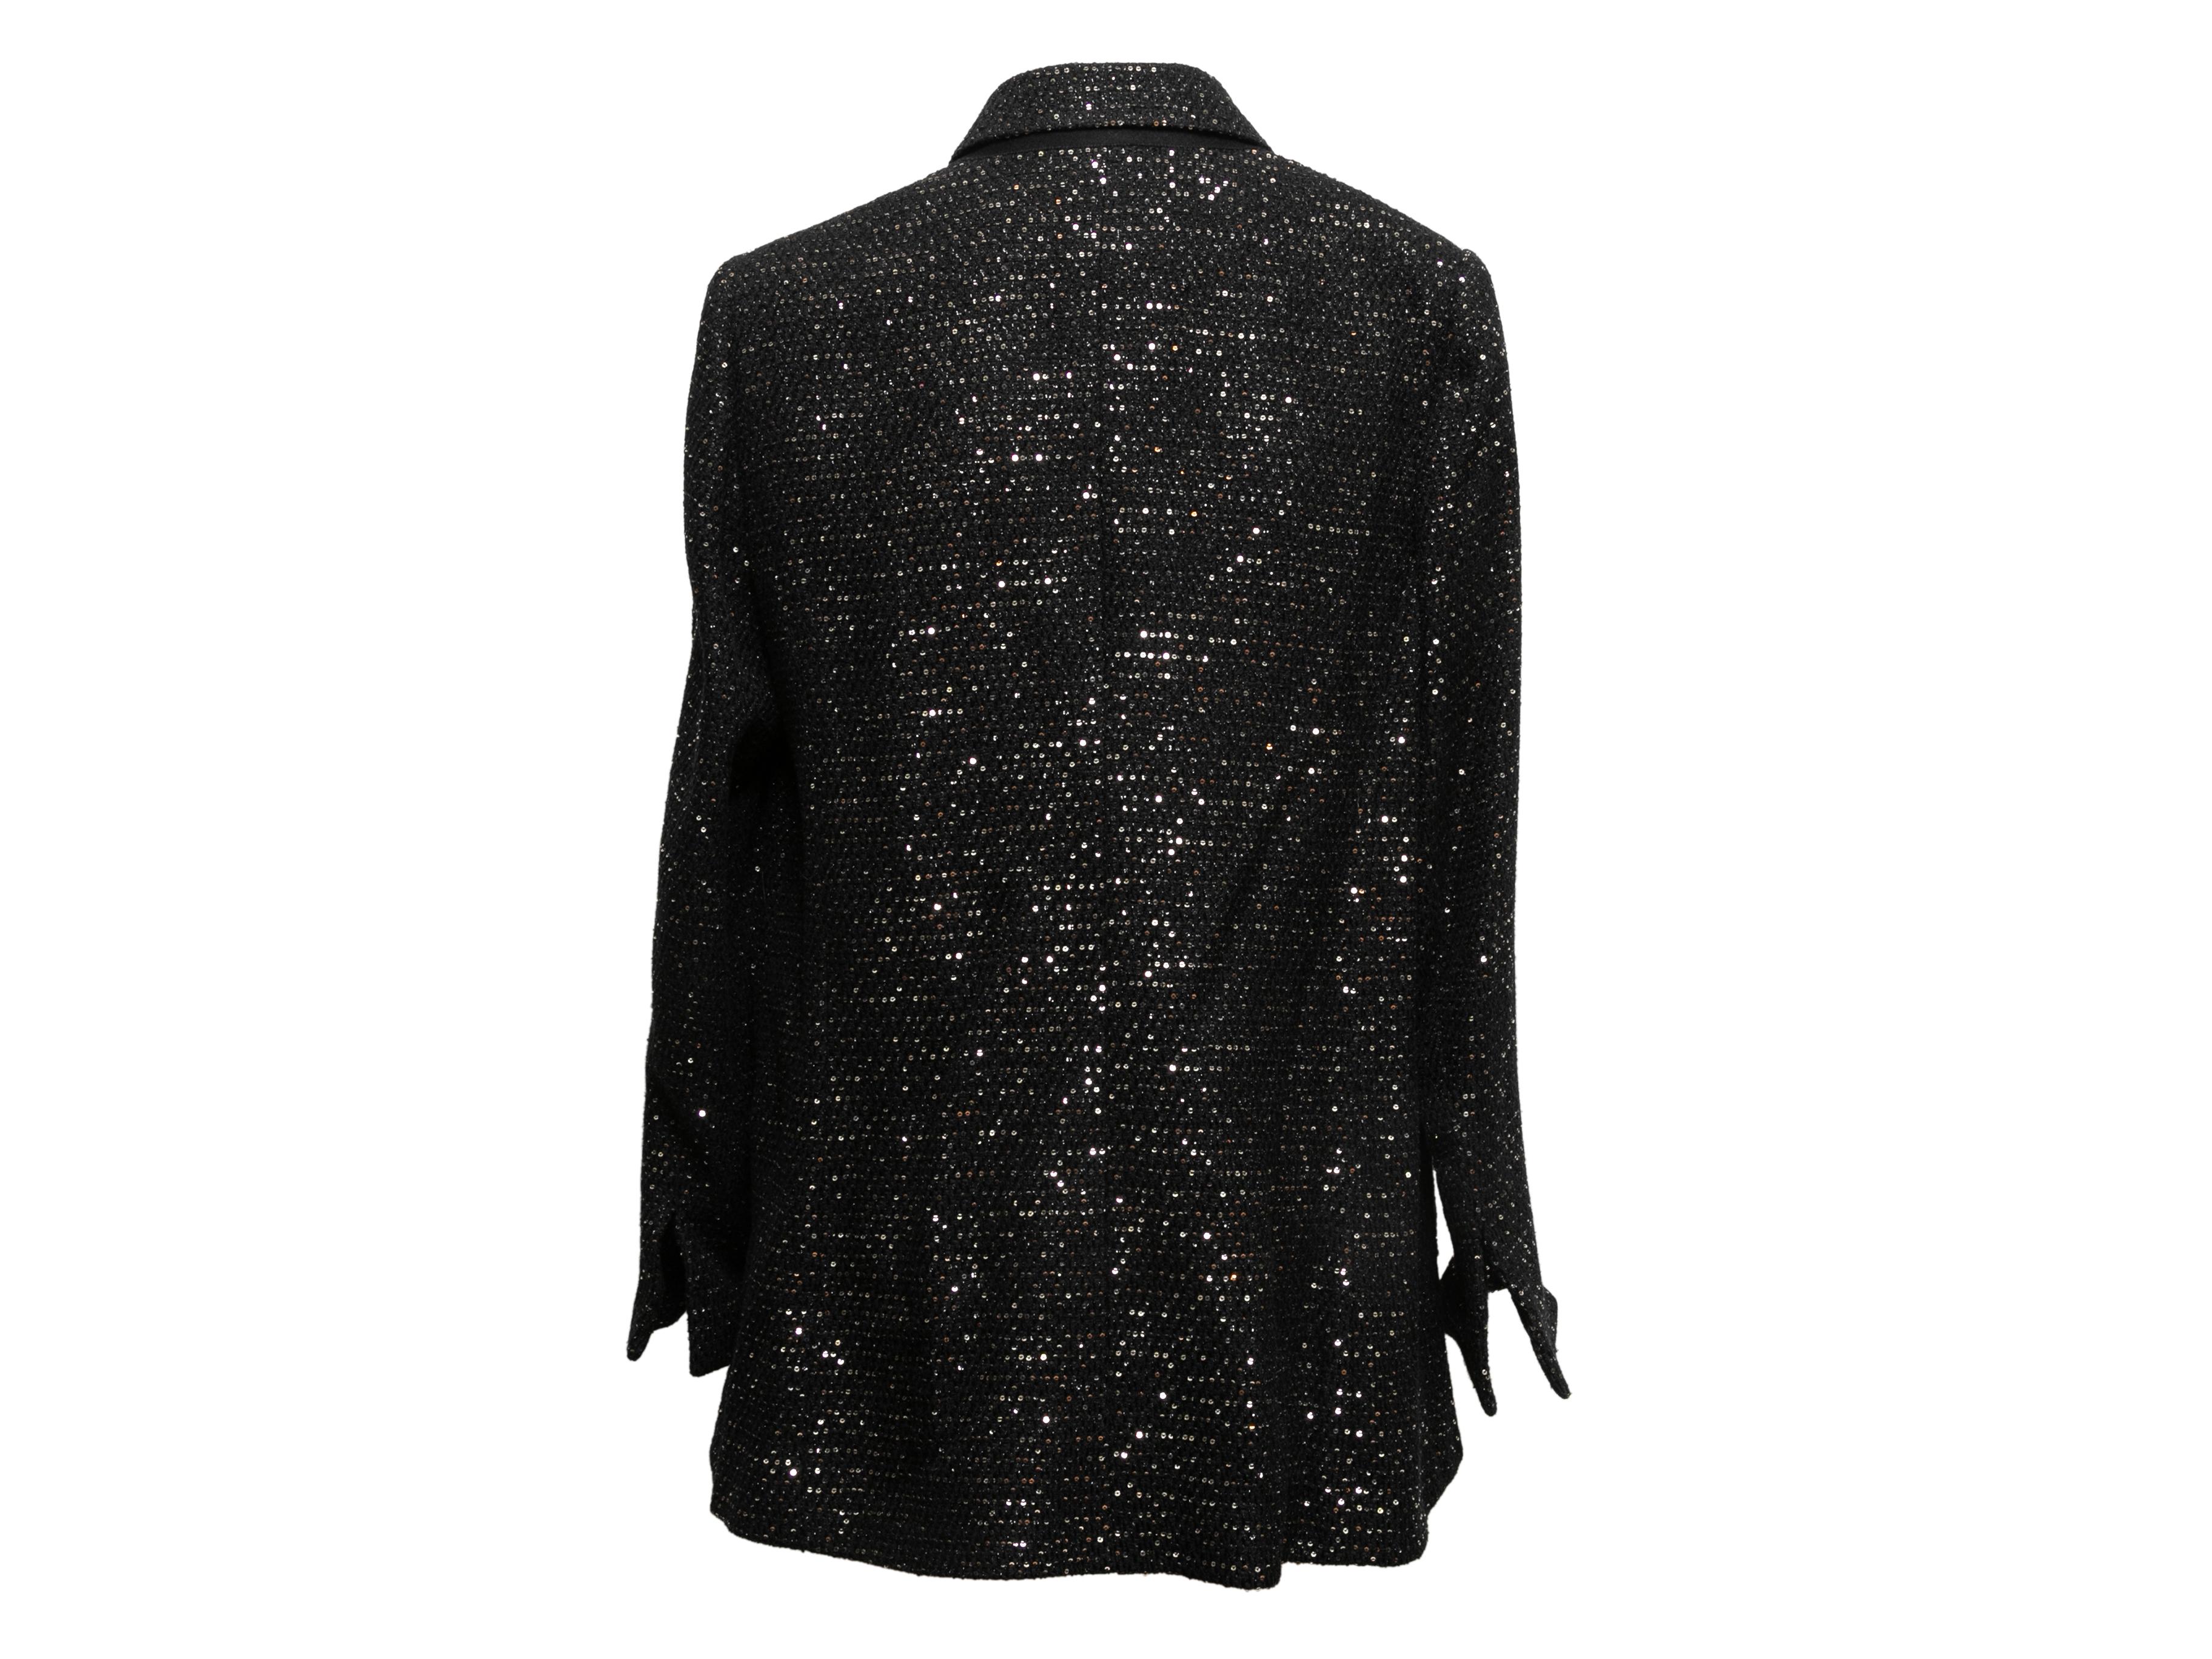 Black & Silver Chanel Cruise 2011 St. Tropez Tweed Blazer Size FR 48 In Good Condition For Sale In New York, NY